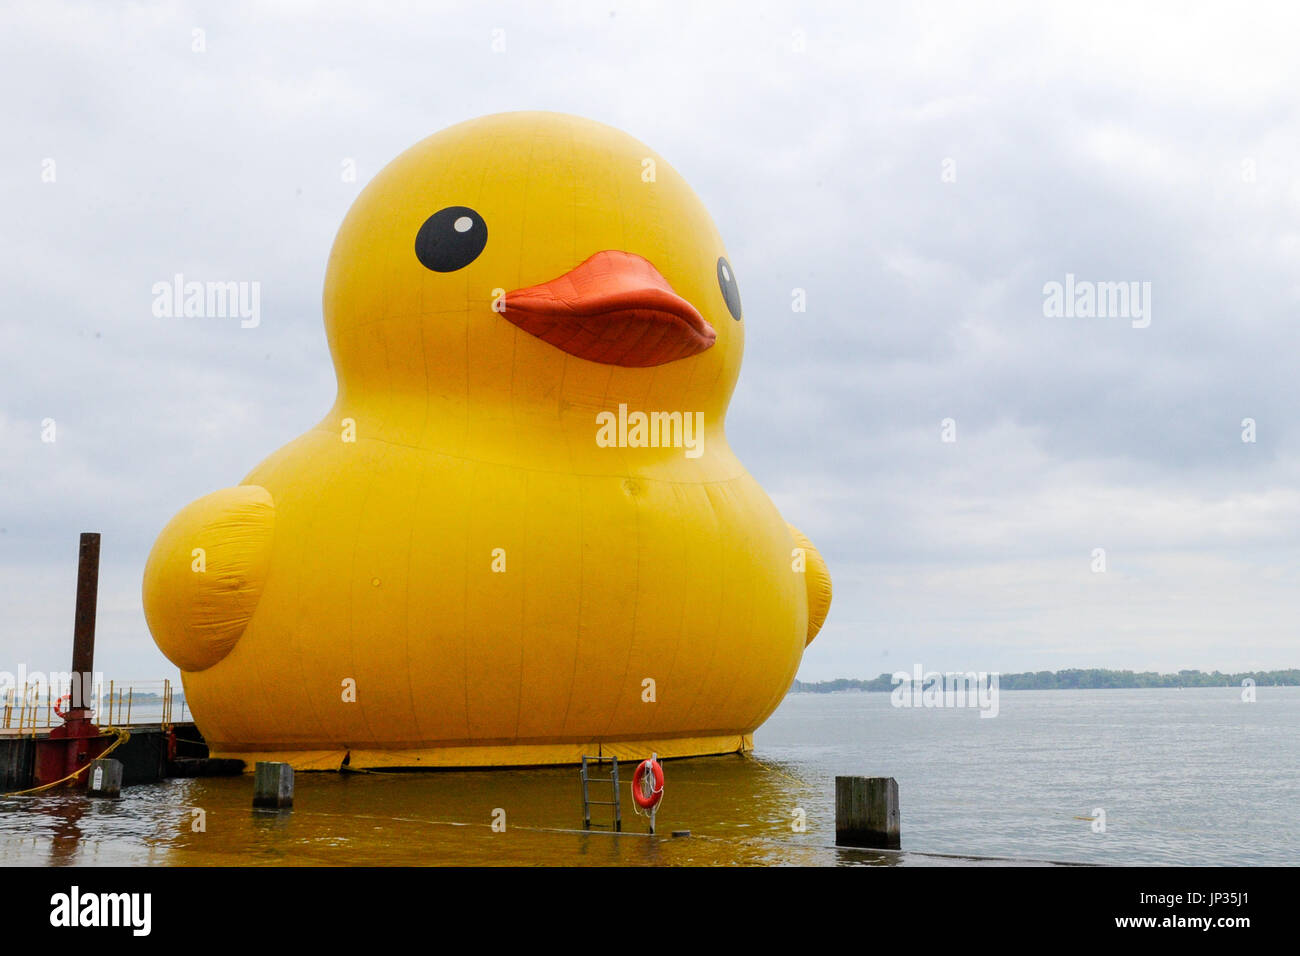 The World's largest Rubber Duck make it's Canadian debut on Toronto's waterfront to celebrate Canada 150th Birthday.  Featuring: Rubber Duck Where: Toronto, Ontario, Canada When: 30 Jun 2017 Credit: Dominic Chan/WENN.com Stock Photo